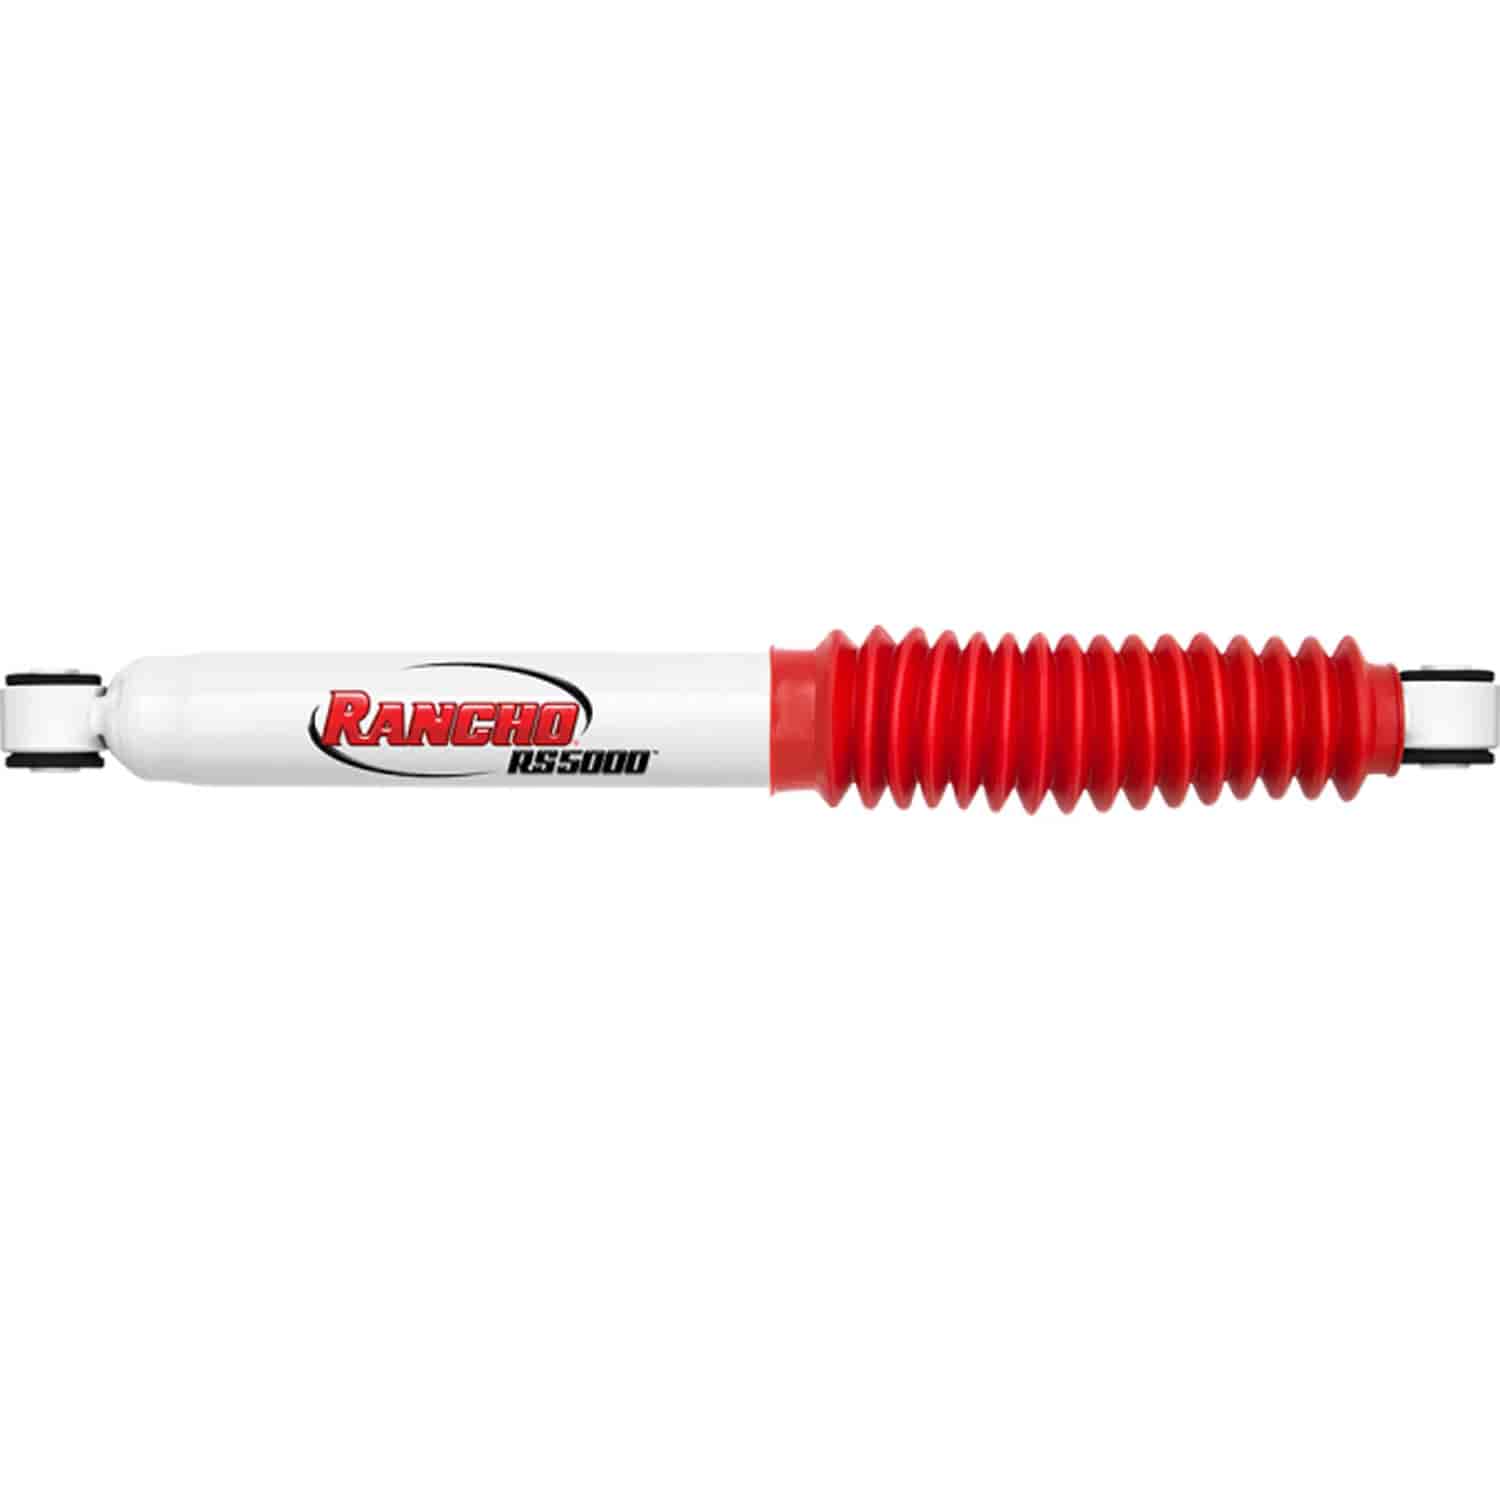 RS5000 Rear Shock Absorber Fits Dodge Nitro and Jeep Liberty